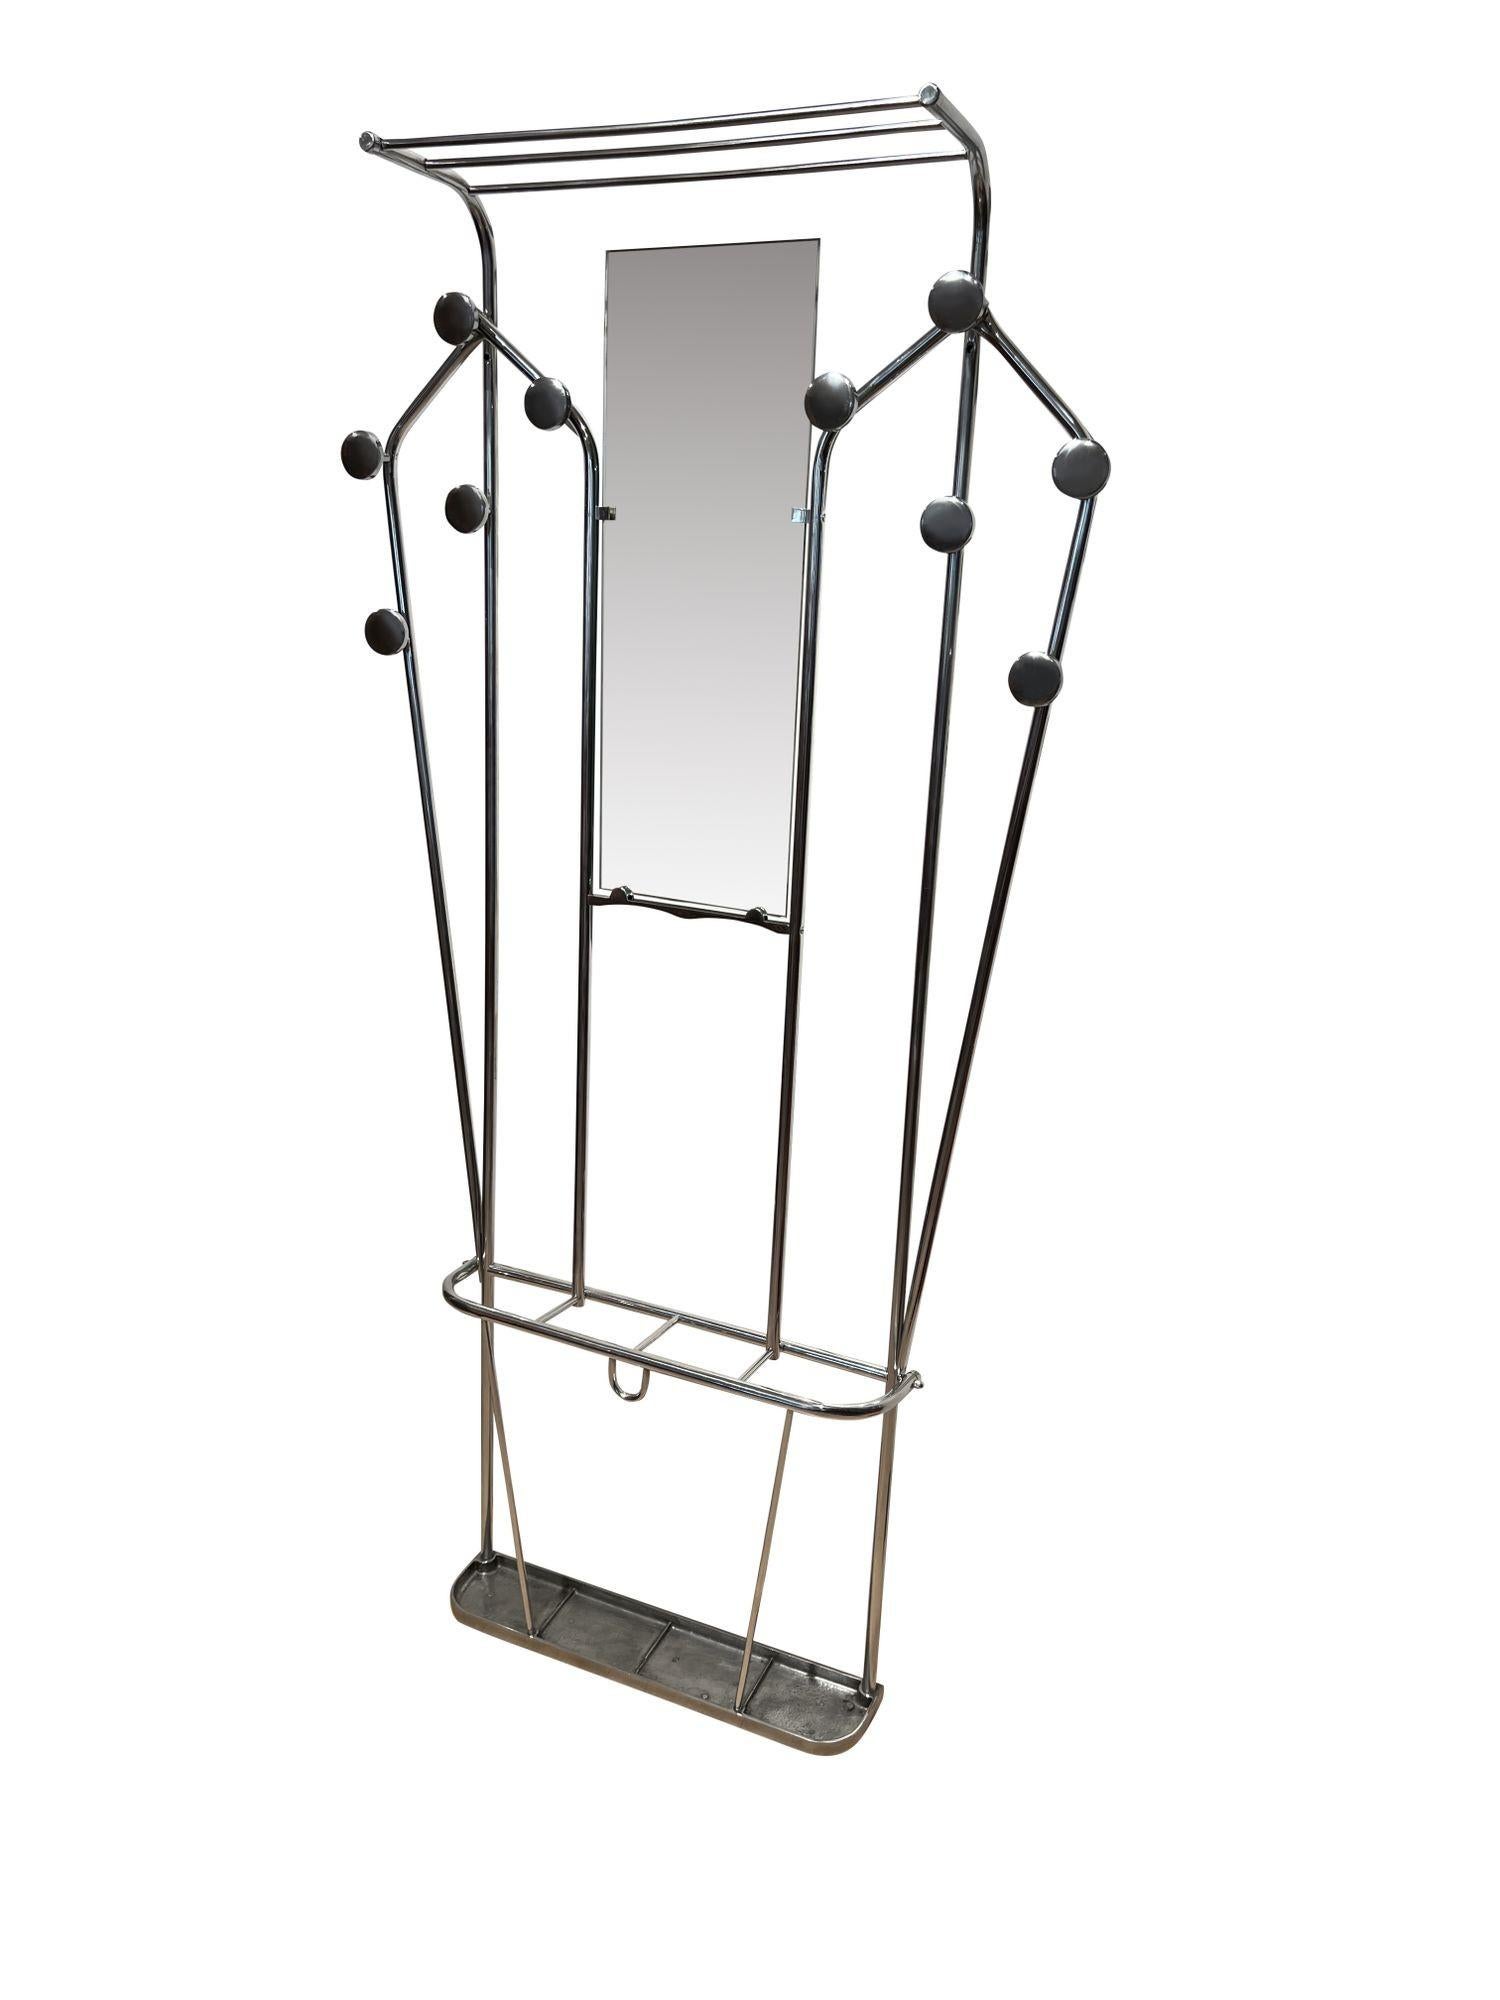 Art Deco Wardrobe with mirror, aluminum tubes, France circa 1930
 
Art Deco wardrobe or wall coat rack
 
Aluminum tubes, newly polished to high gloss 
Mirror added in the center
10 hangers
Above with hat shelf 
Below a metal shelf as